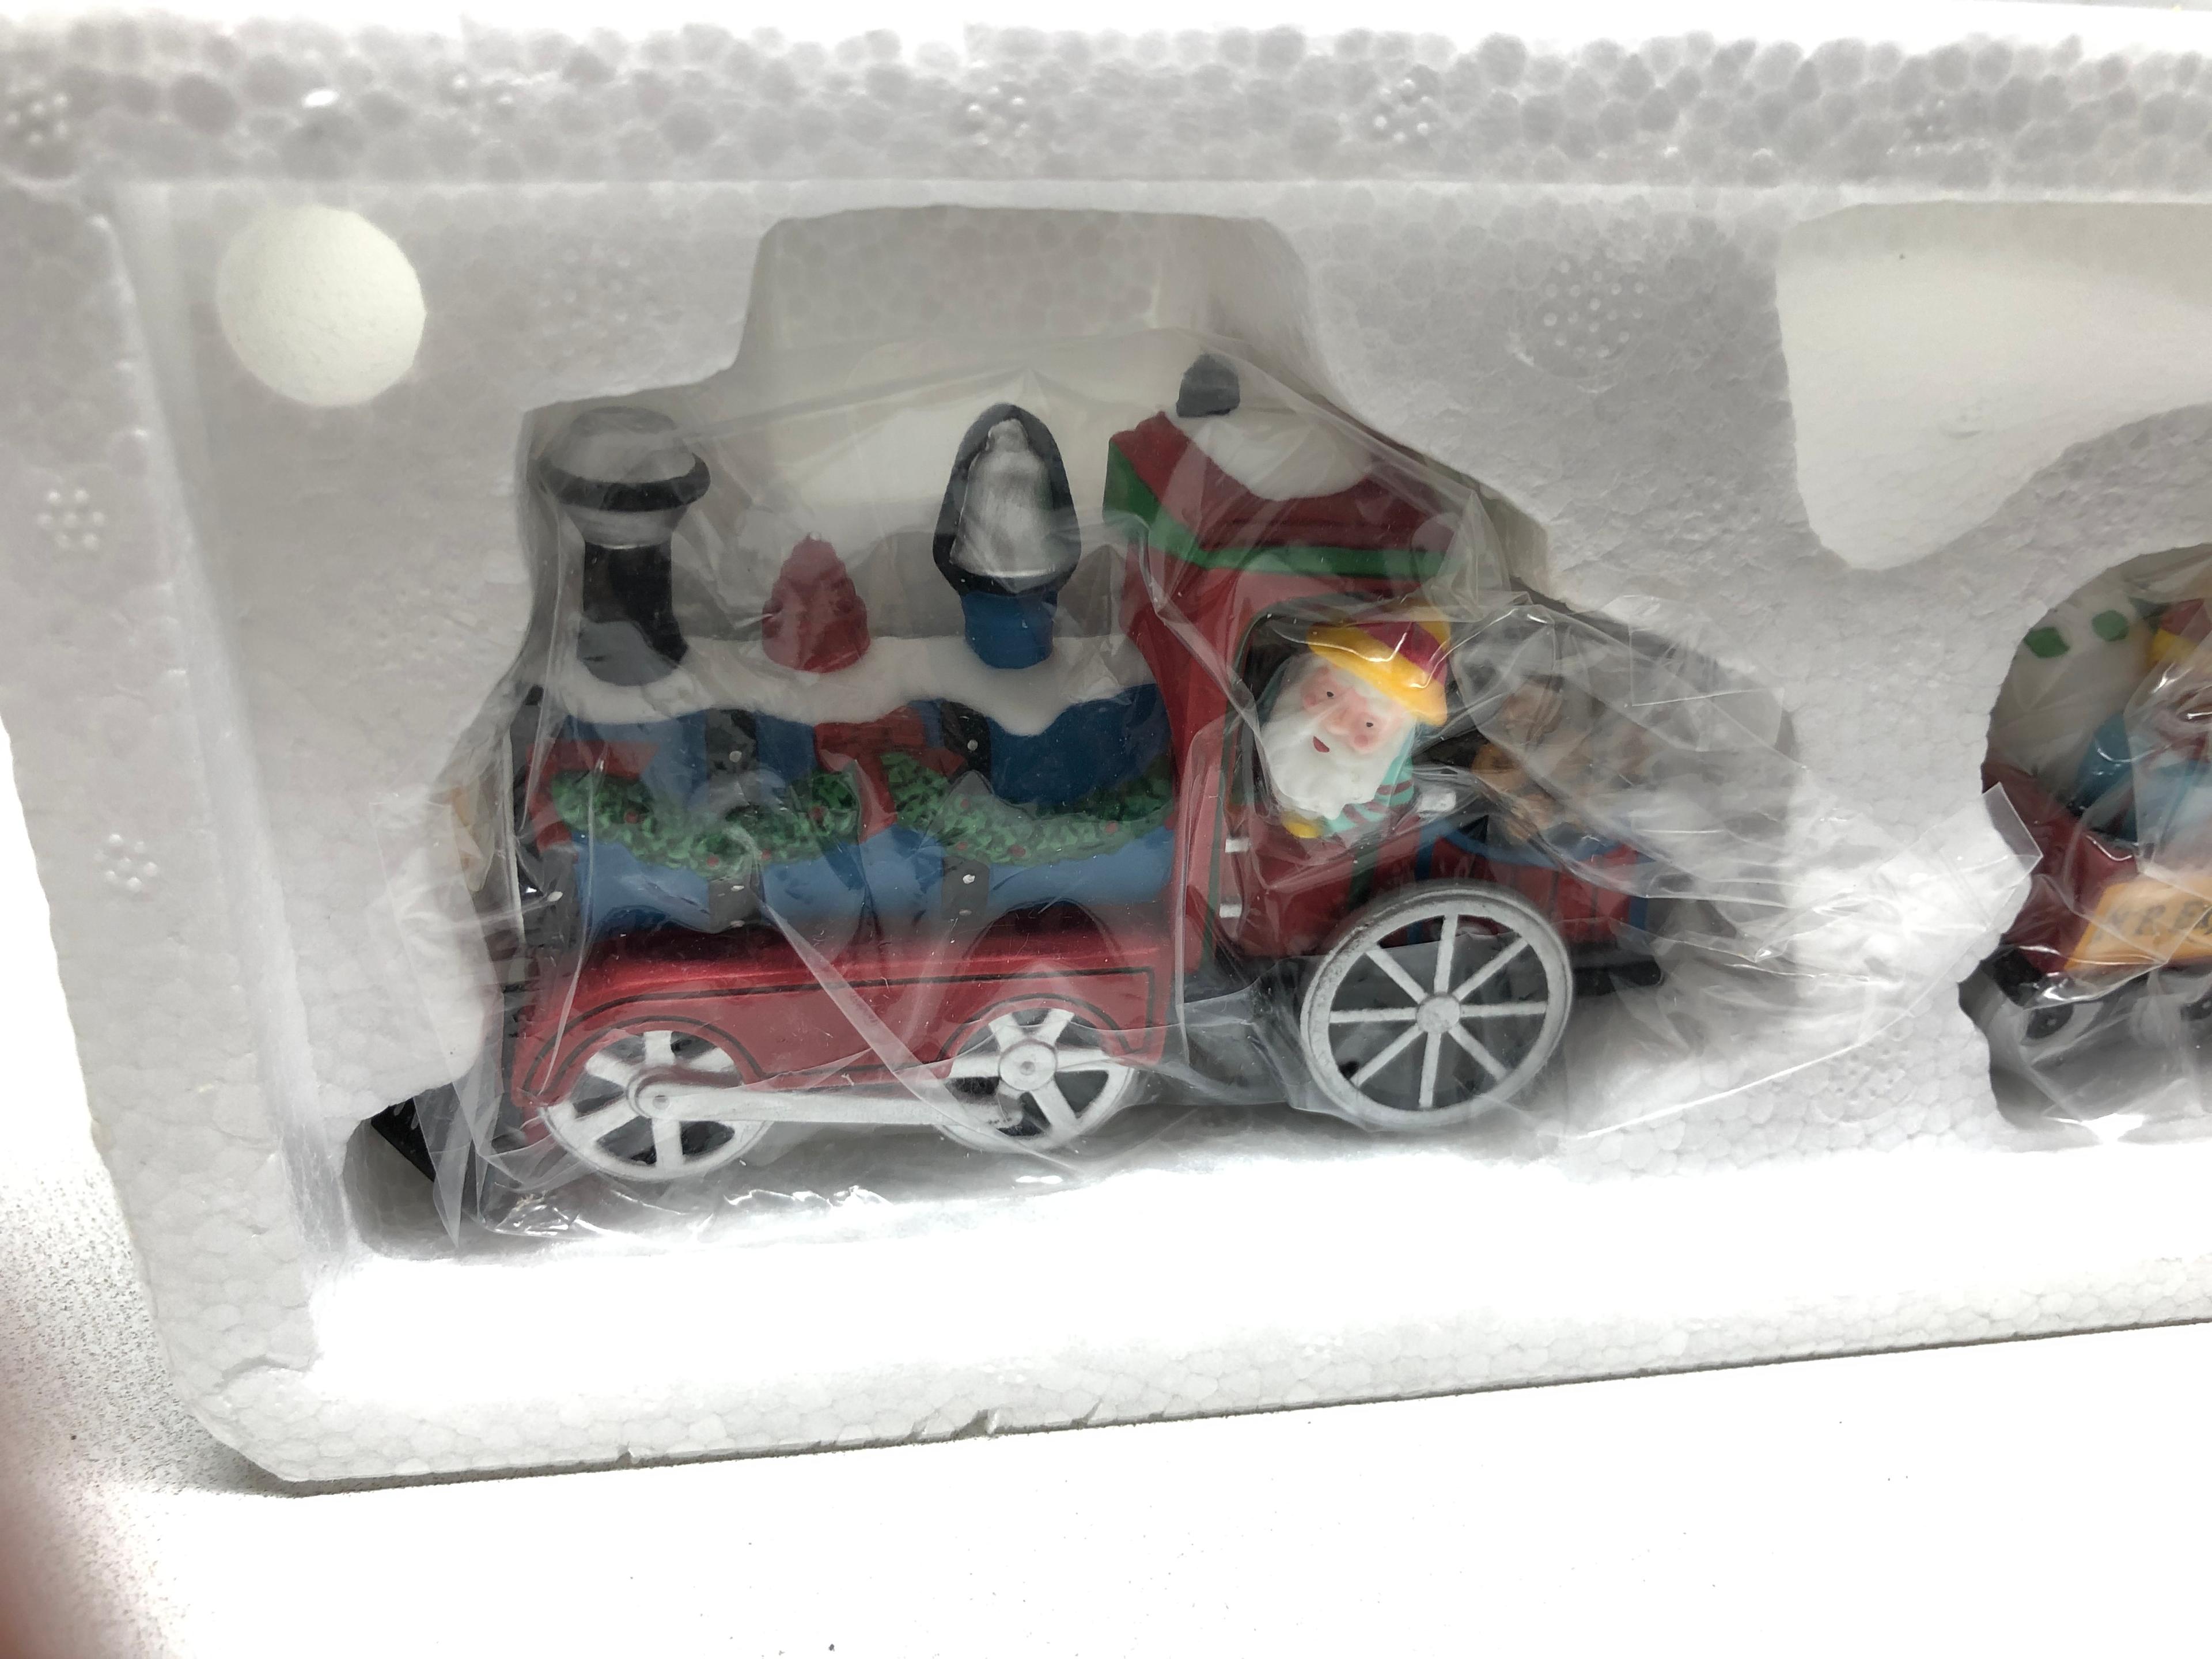 Department 56 North Pole Series "North Pole Express"